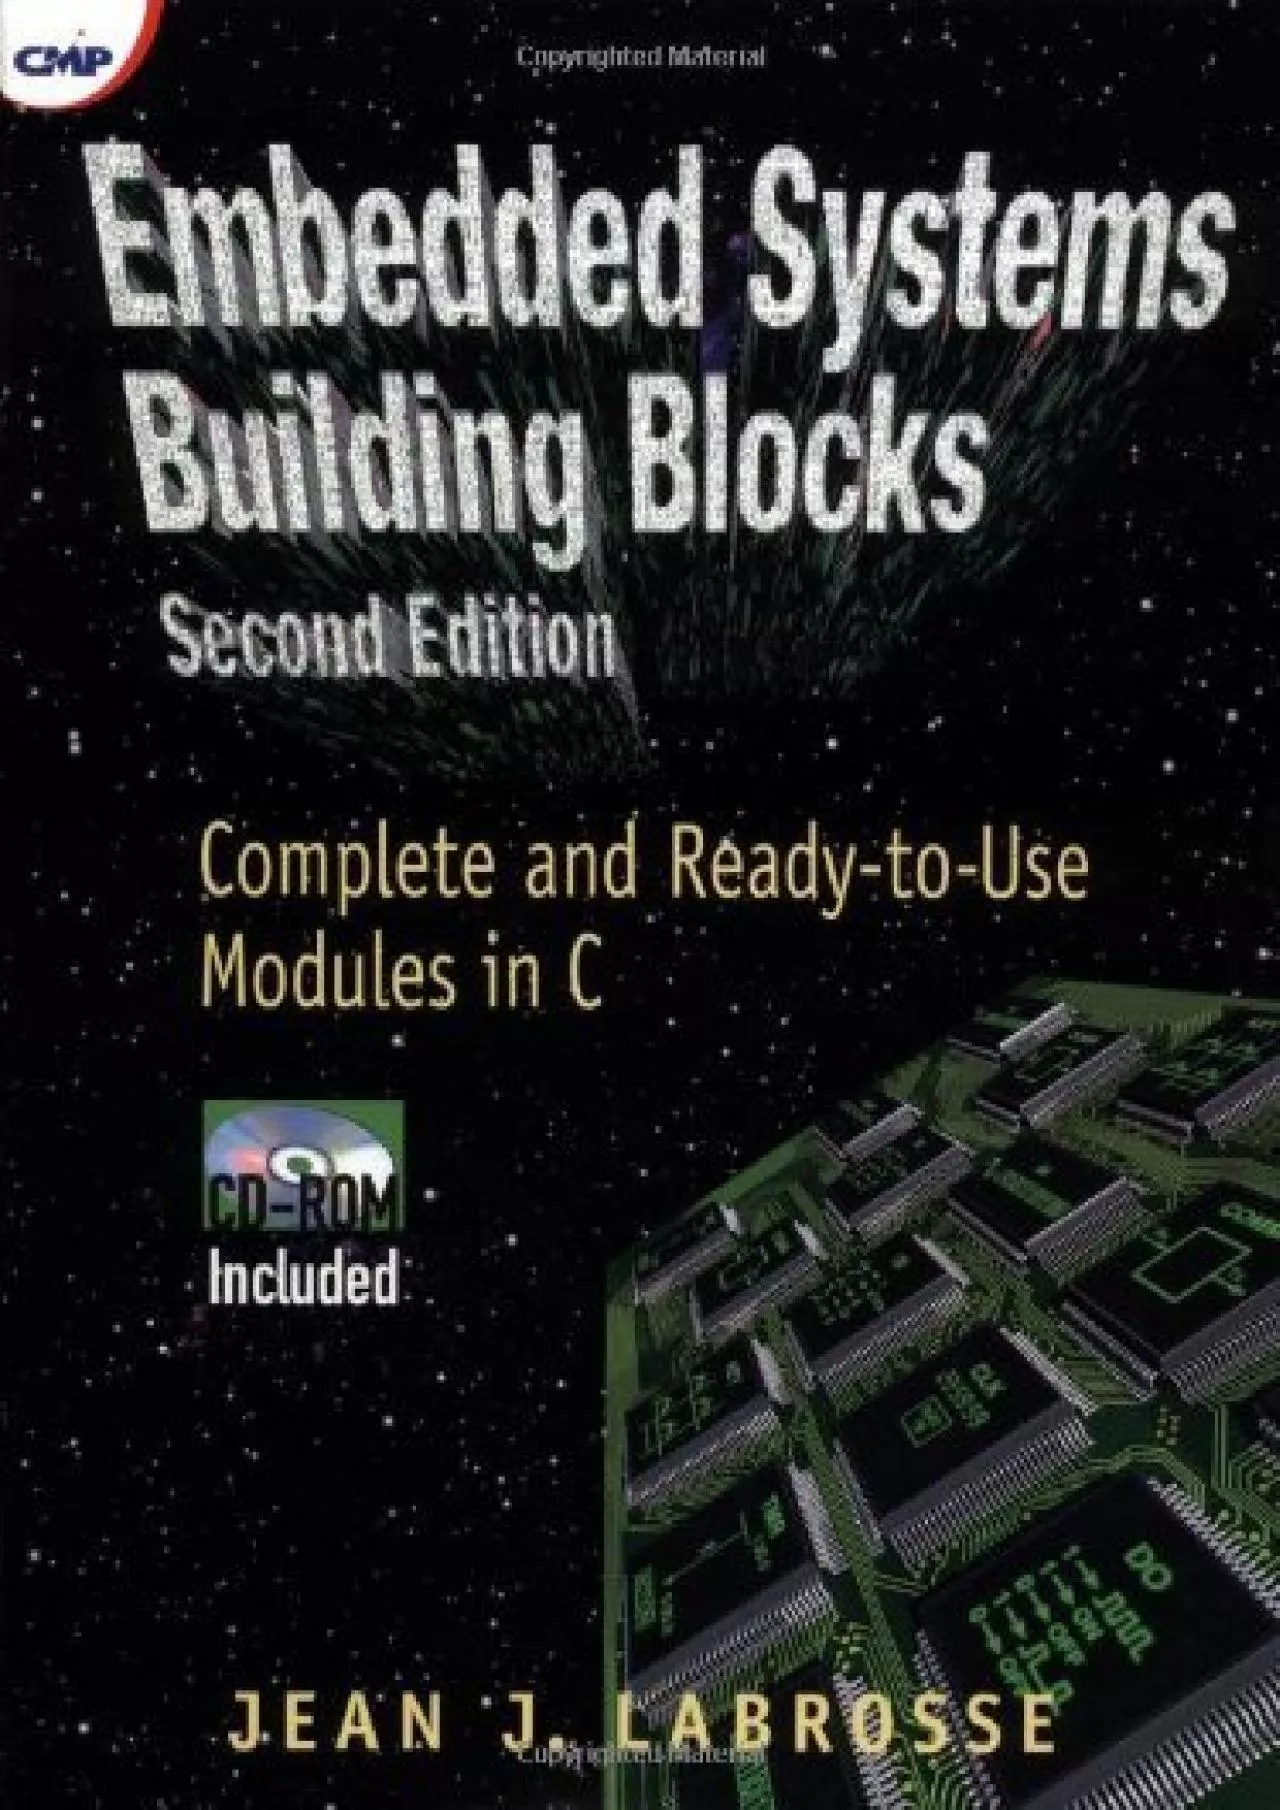 [BEST]-Embedded Systems Building Blocks: Complete and Ready-to-Use Modules in C by Jean